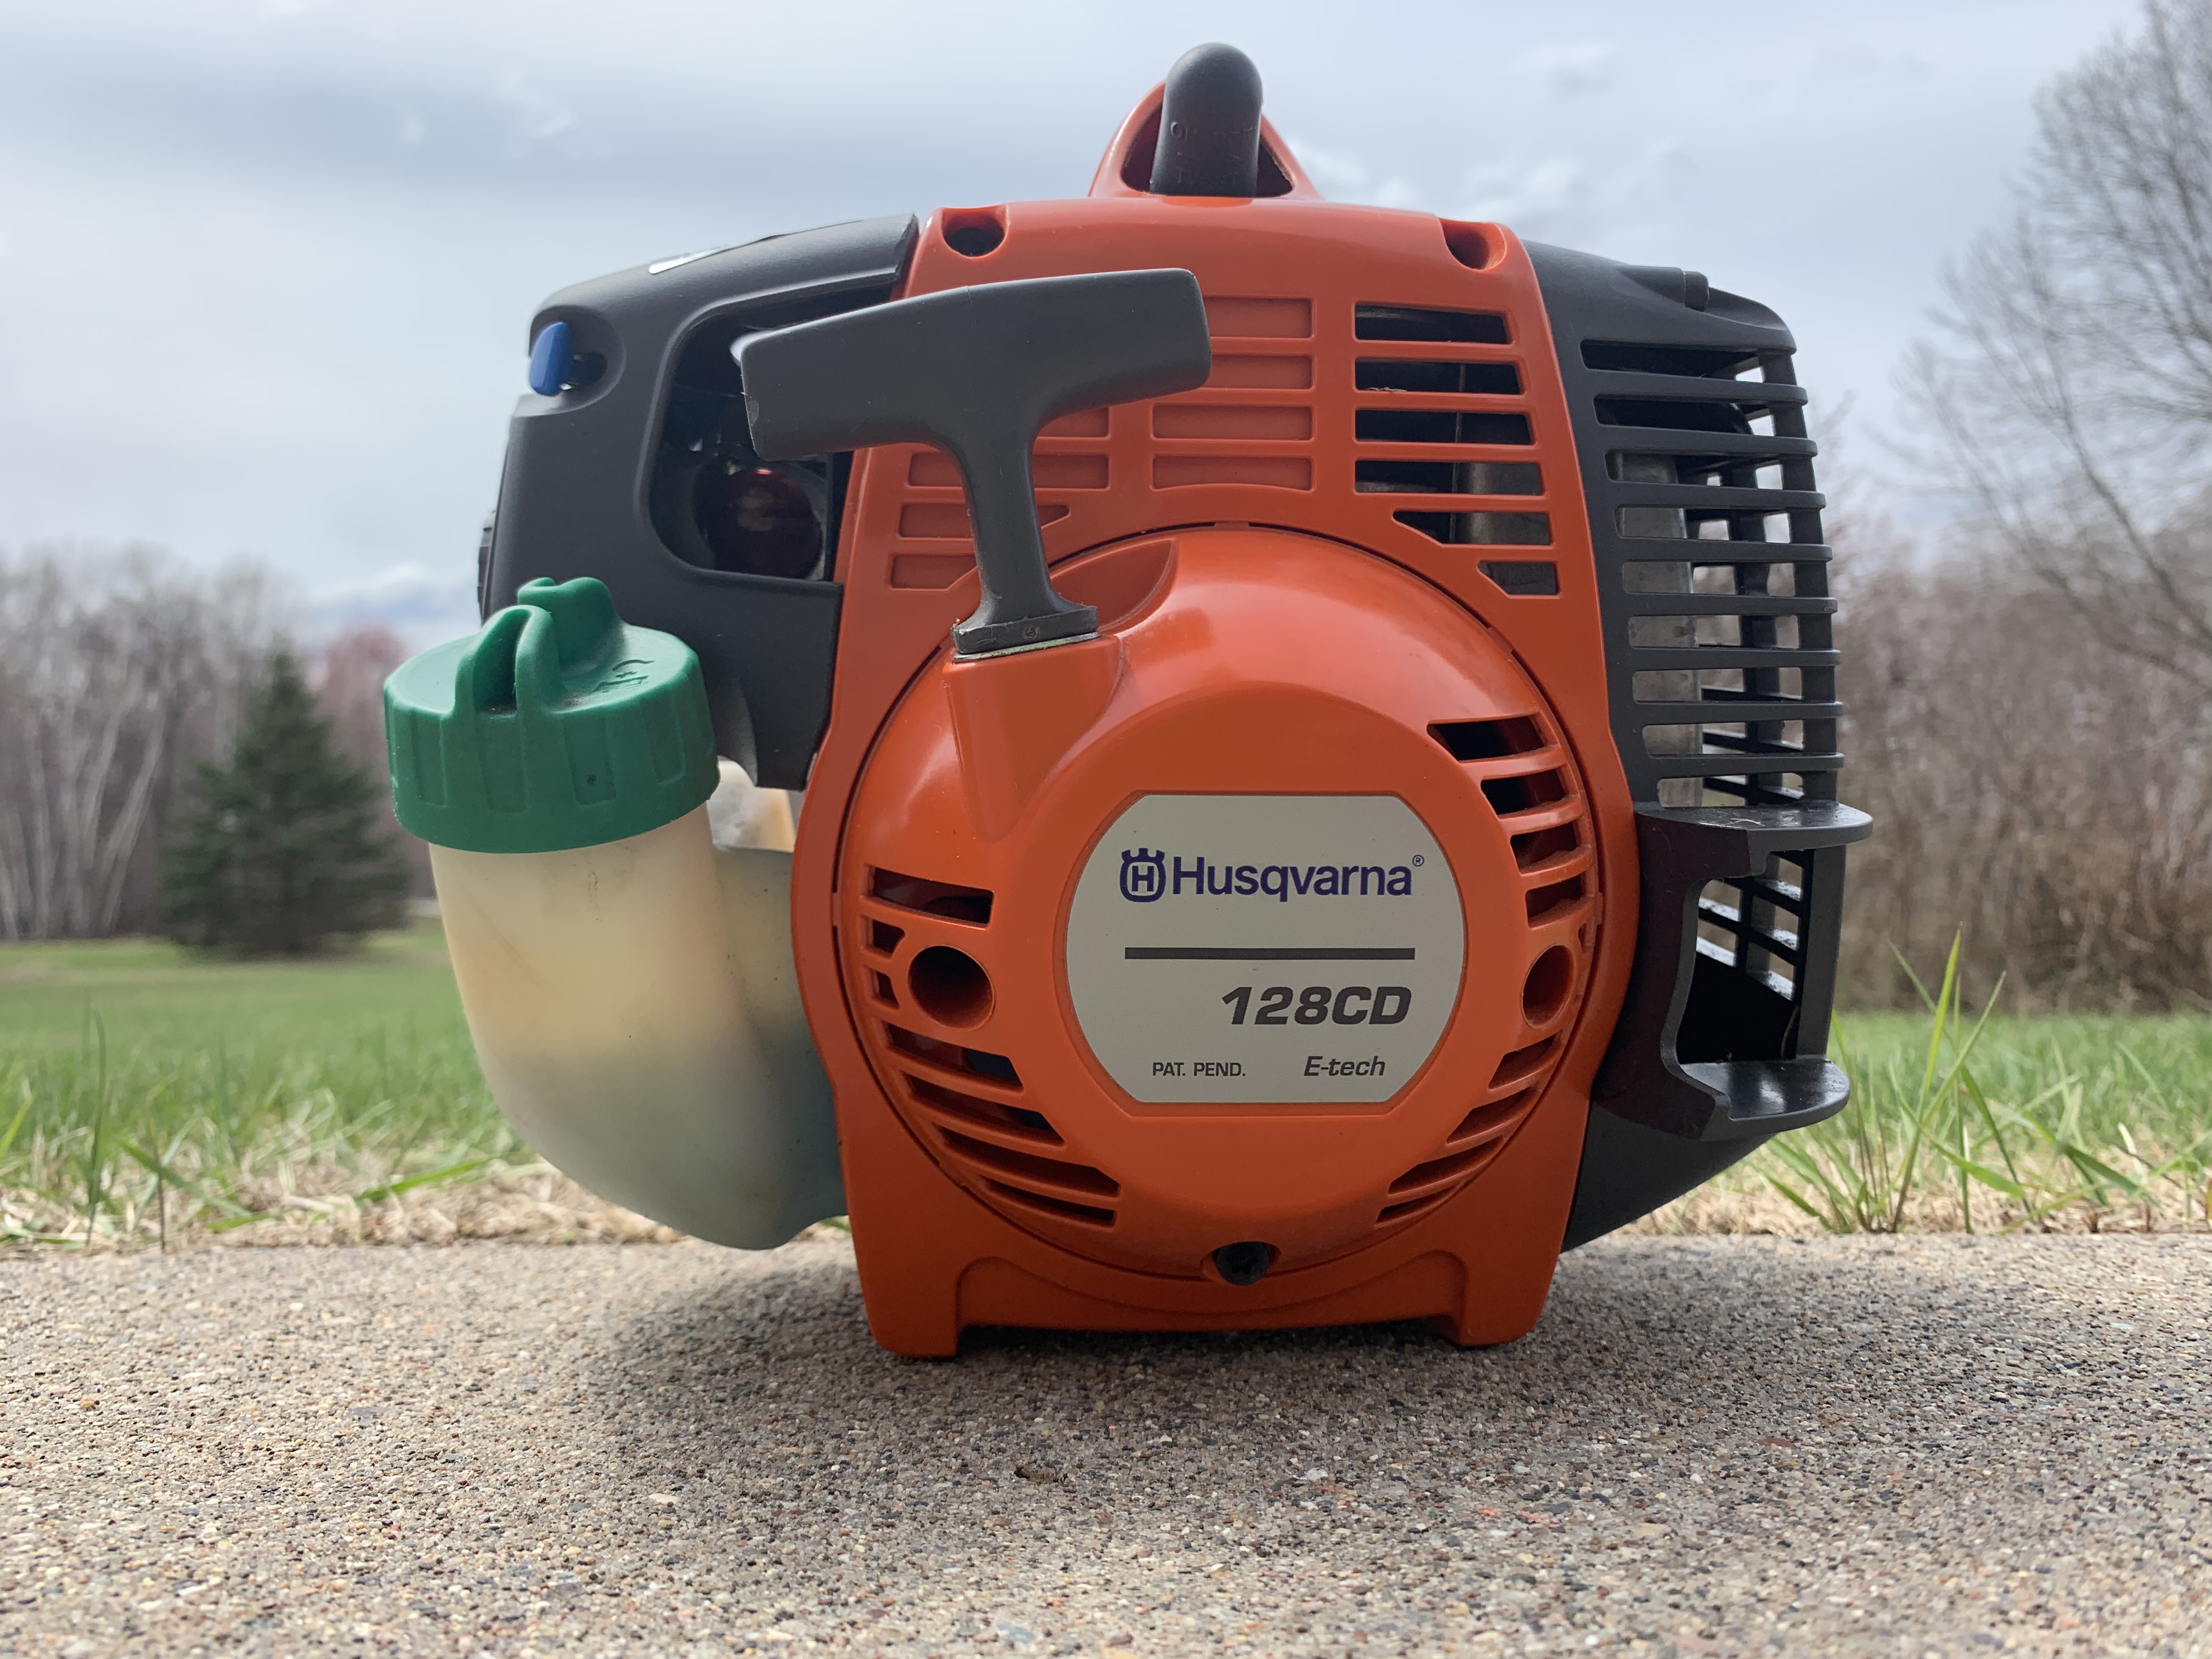 Husqvarna 128 CD String Trimmer – $100 - Classified Ads | In-Depth Outdoors